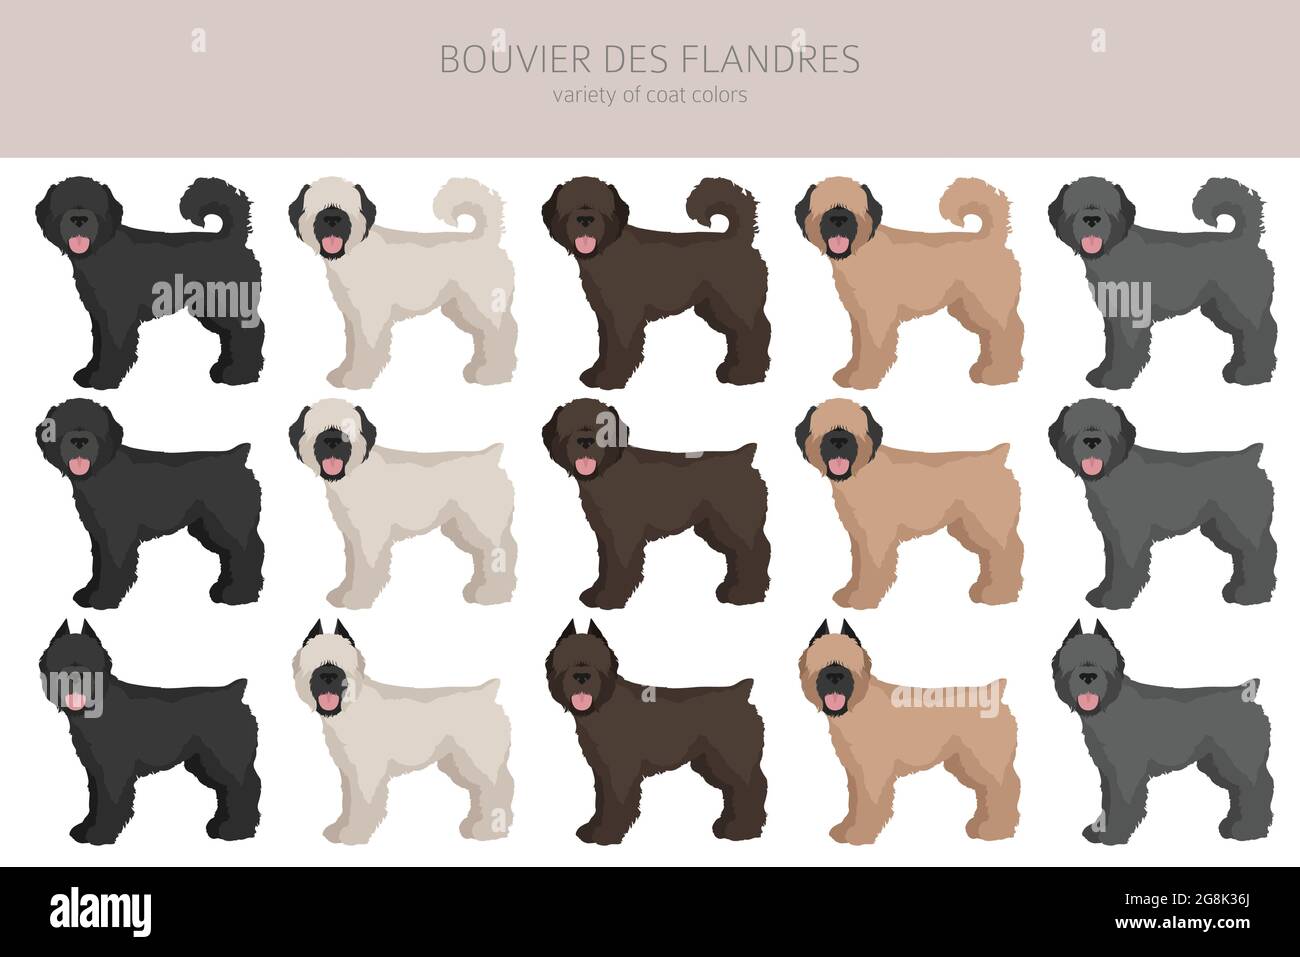 Bouvier des Flandres clipart. Different coat colors and poses set.  Vector illustration Stock Vector